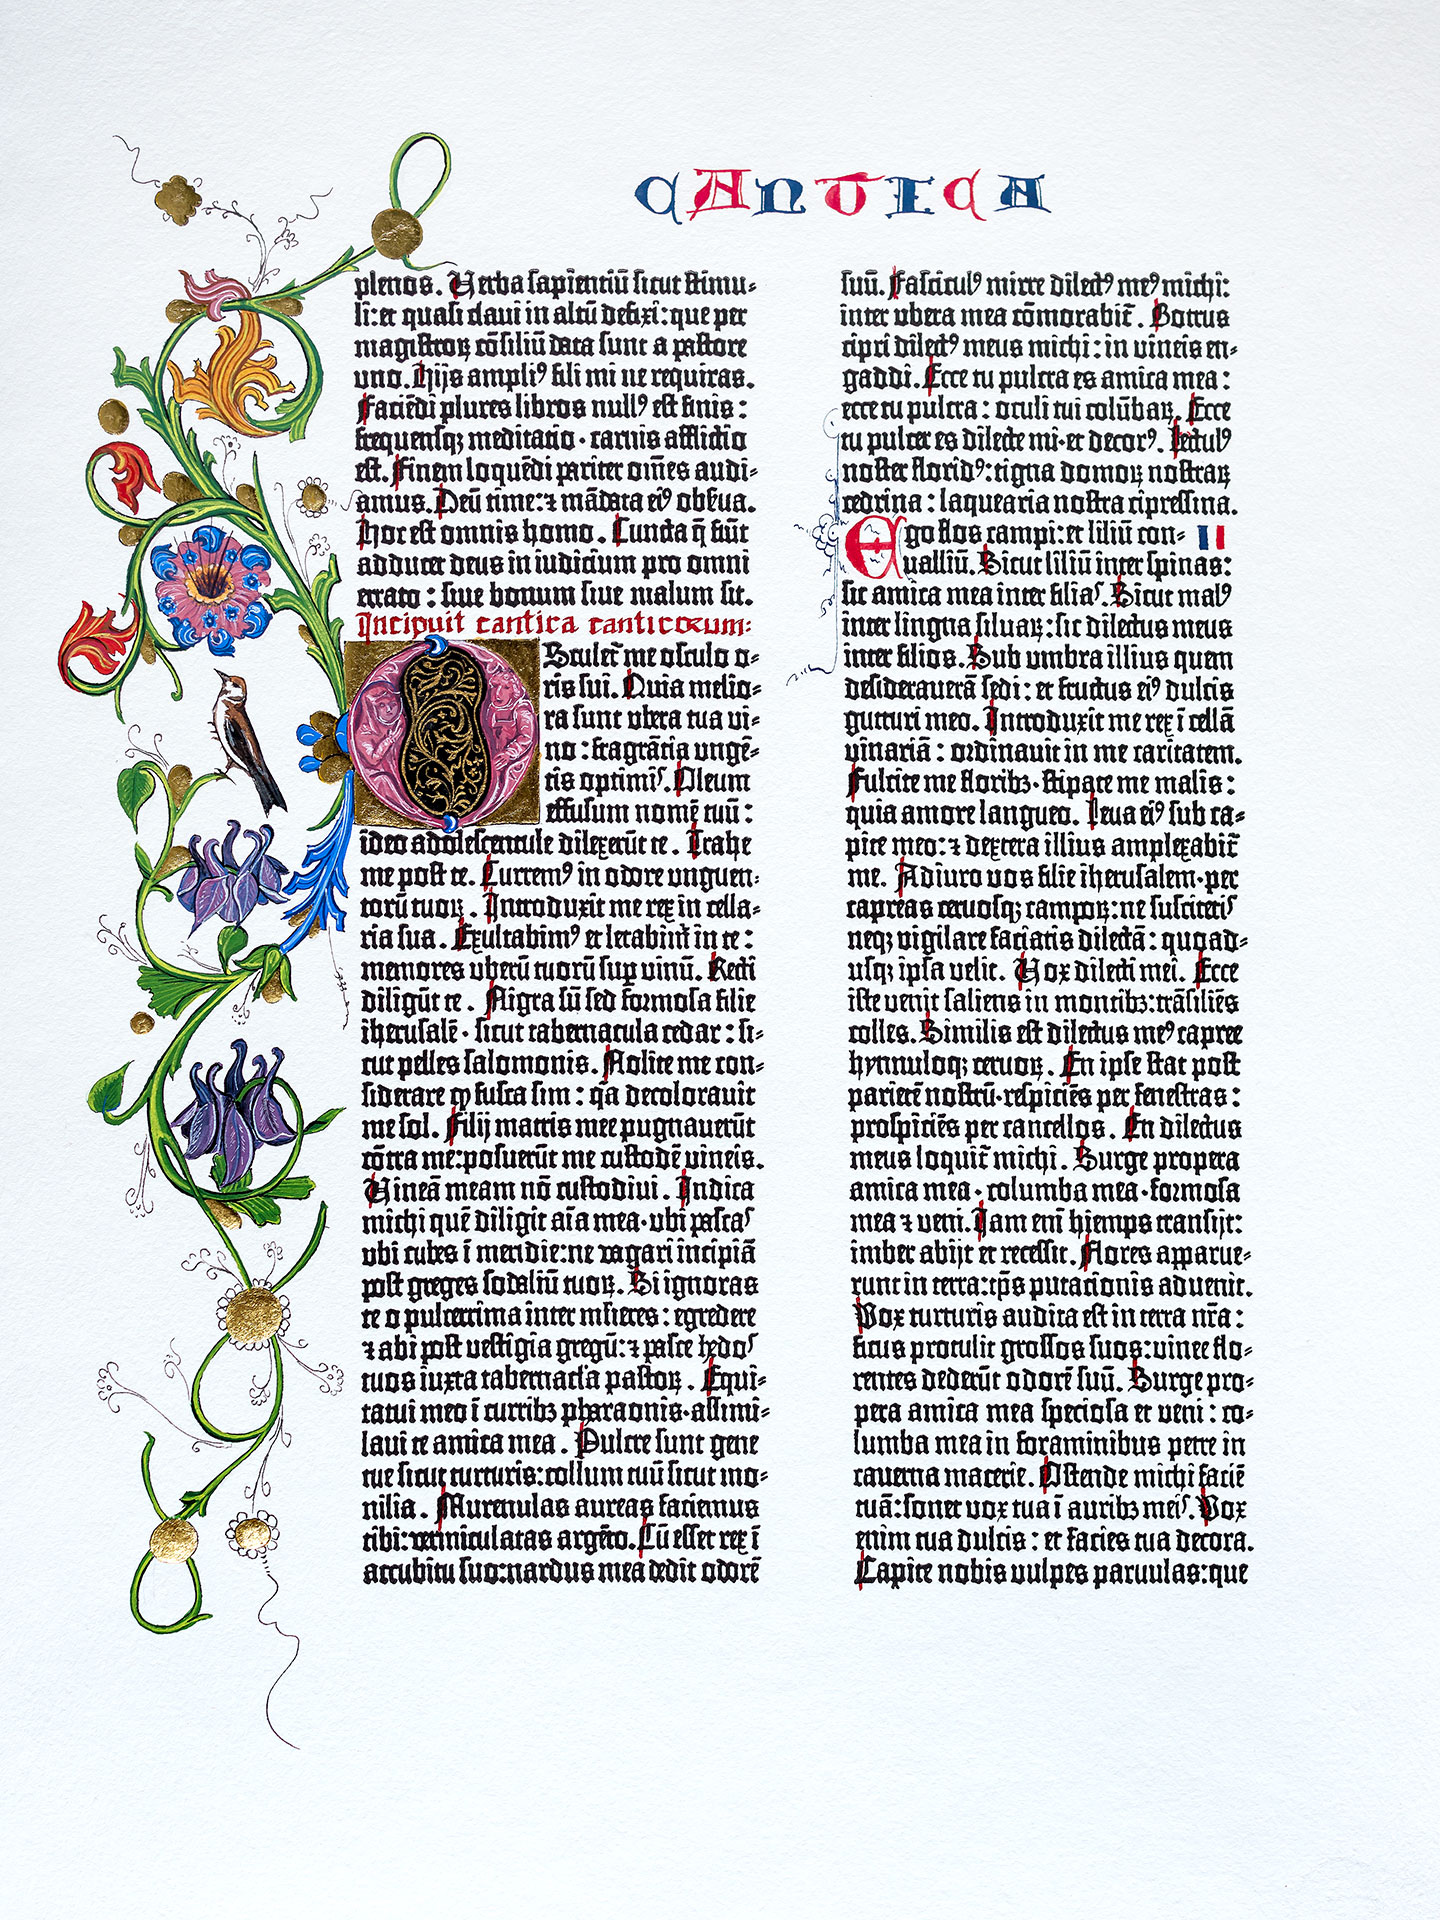 Cantica Canticorum. Ornamental page from the Berlin Gutenberg Bible